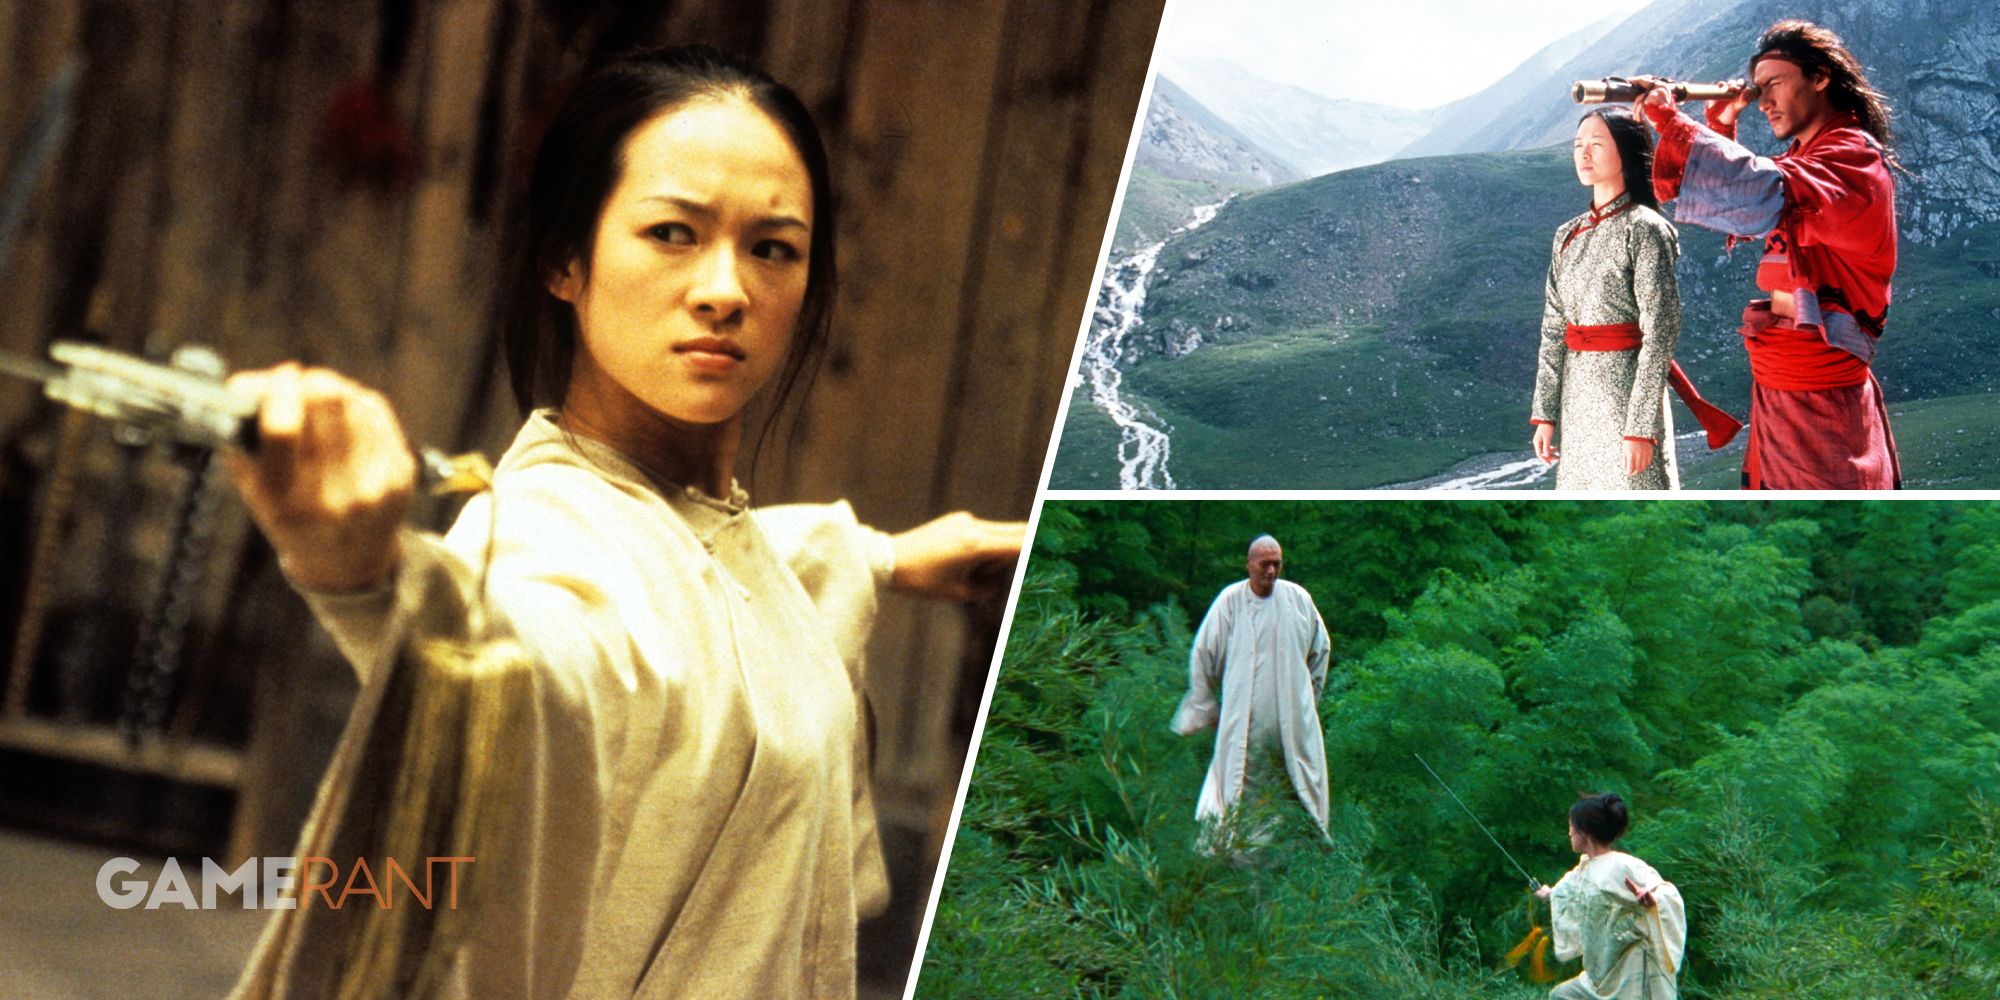 Crouching Tiger, Hidden Dragon Jen Yu holding a sword on left, Jen Yu and Lo 'Dark Cloud looking over the landscape on top right, Master Li Mu Bai and Jen Yu in the iconic fighting scene on bottom right